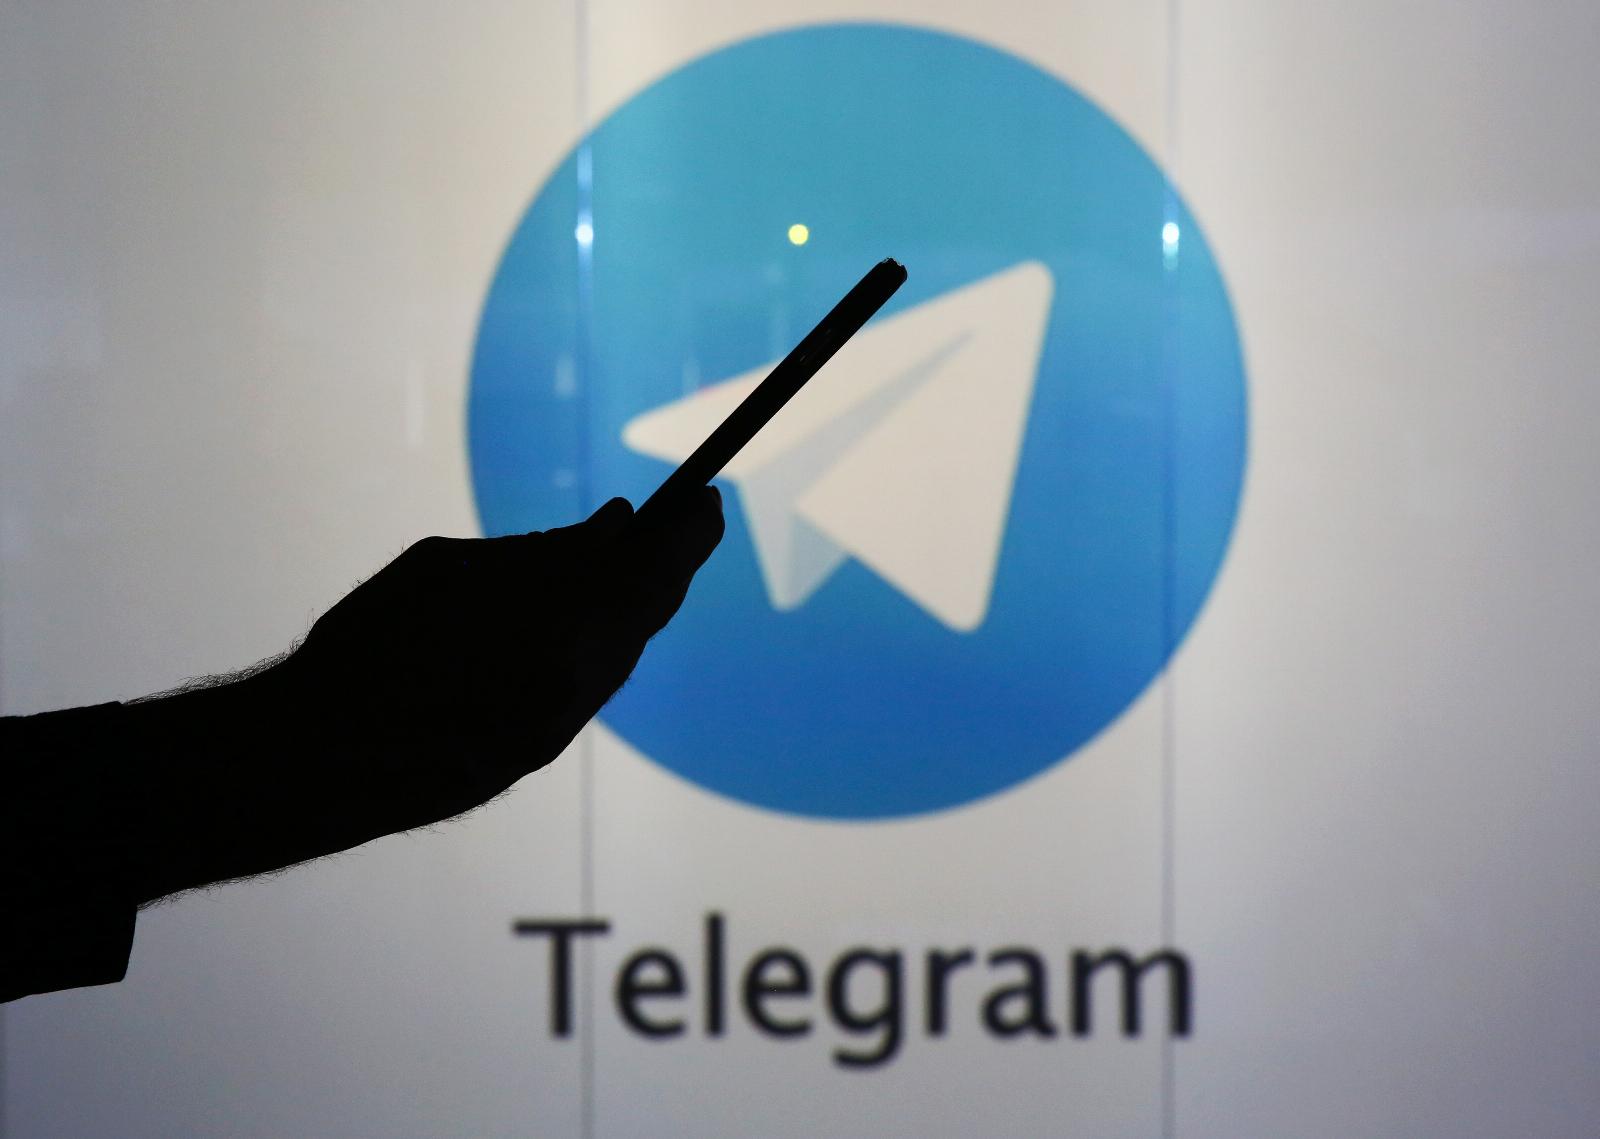 Telegram founder says the company will become profitable next year